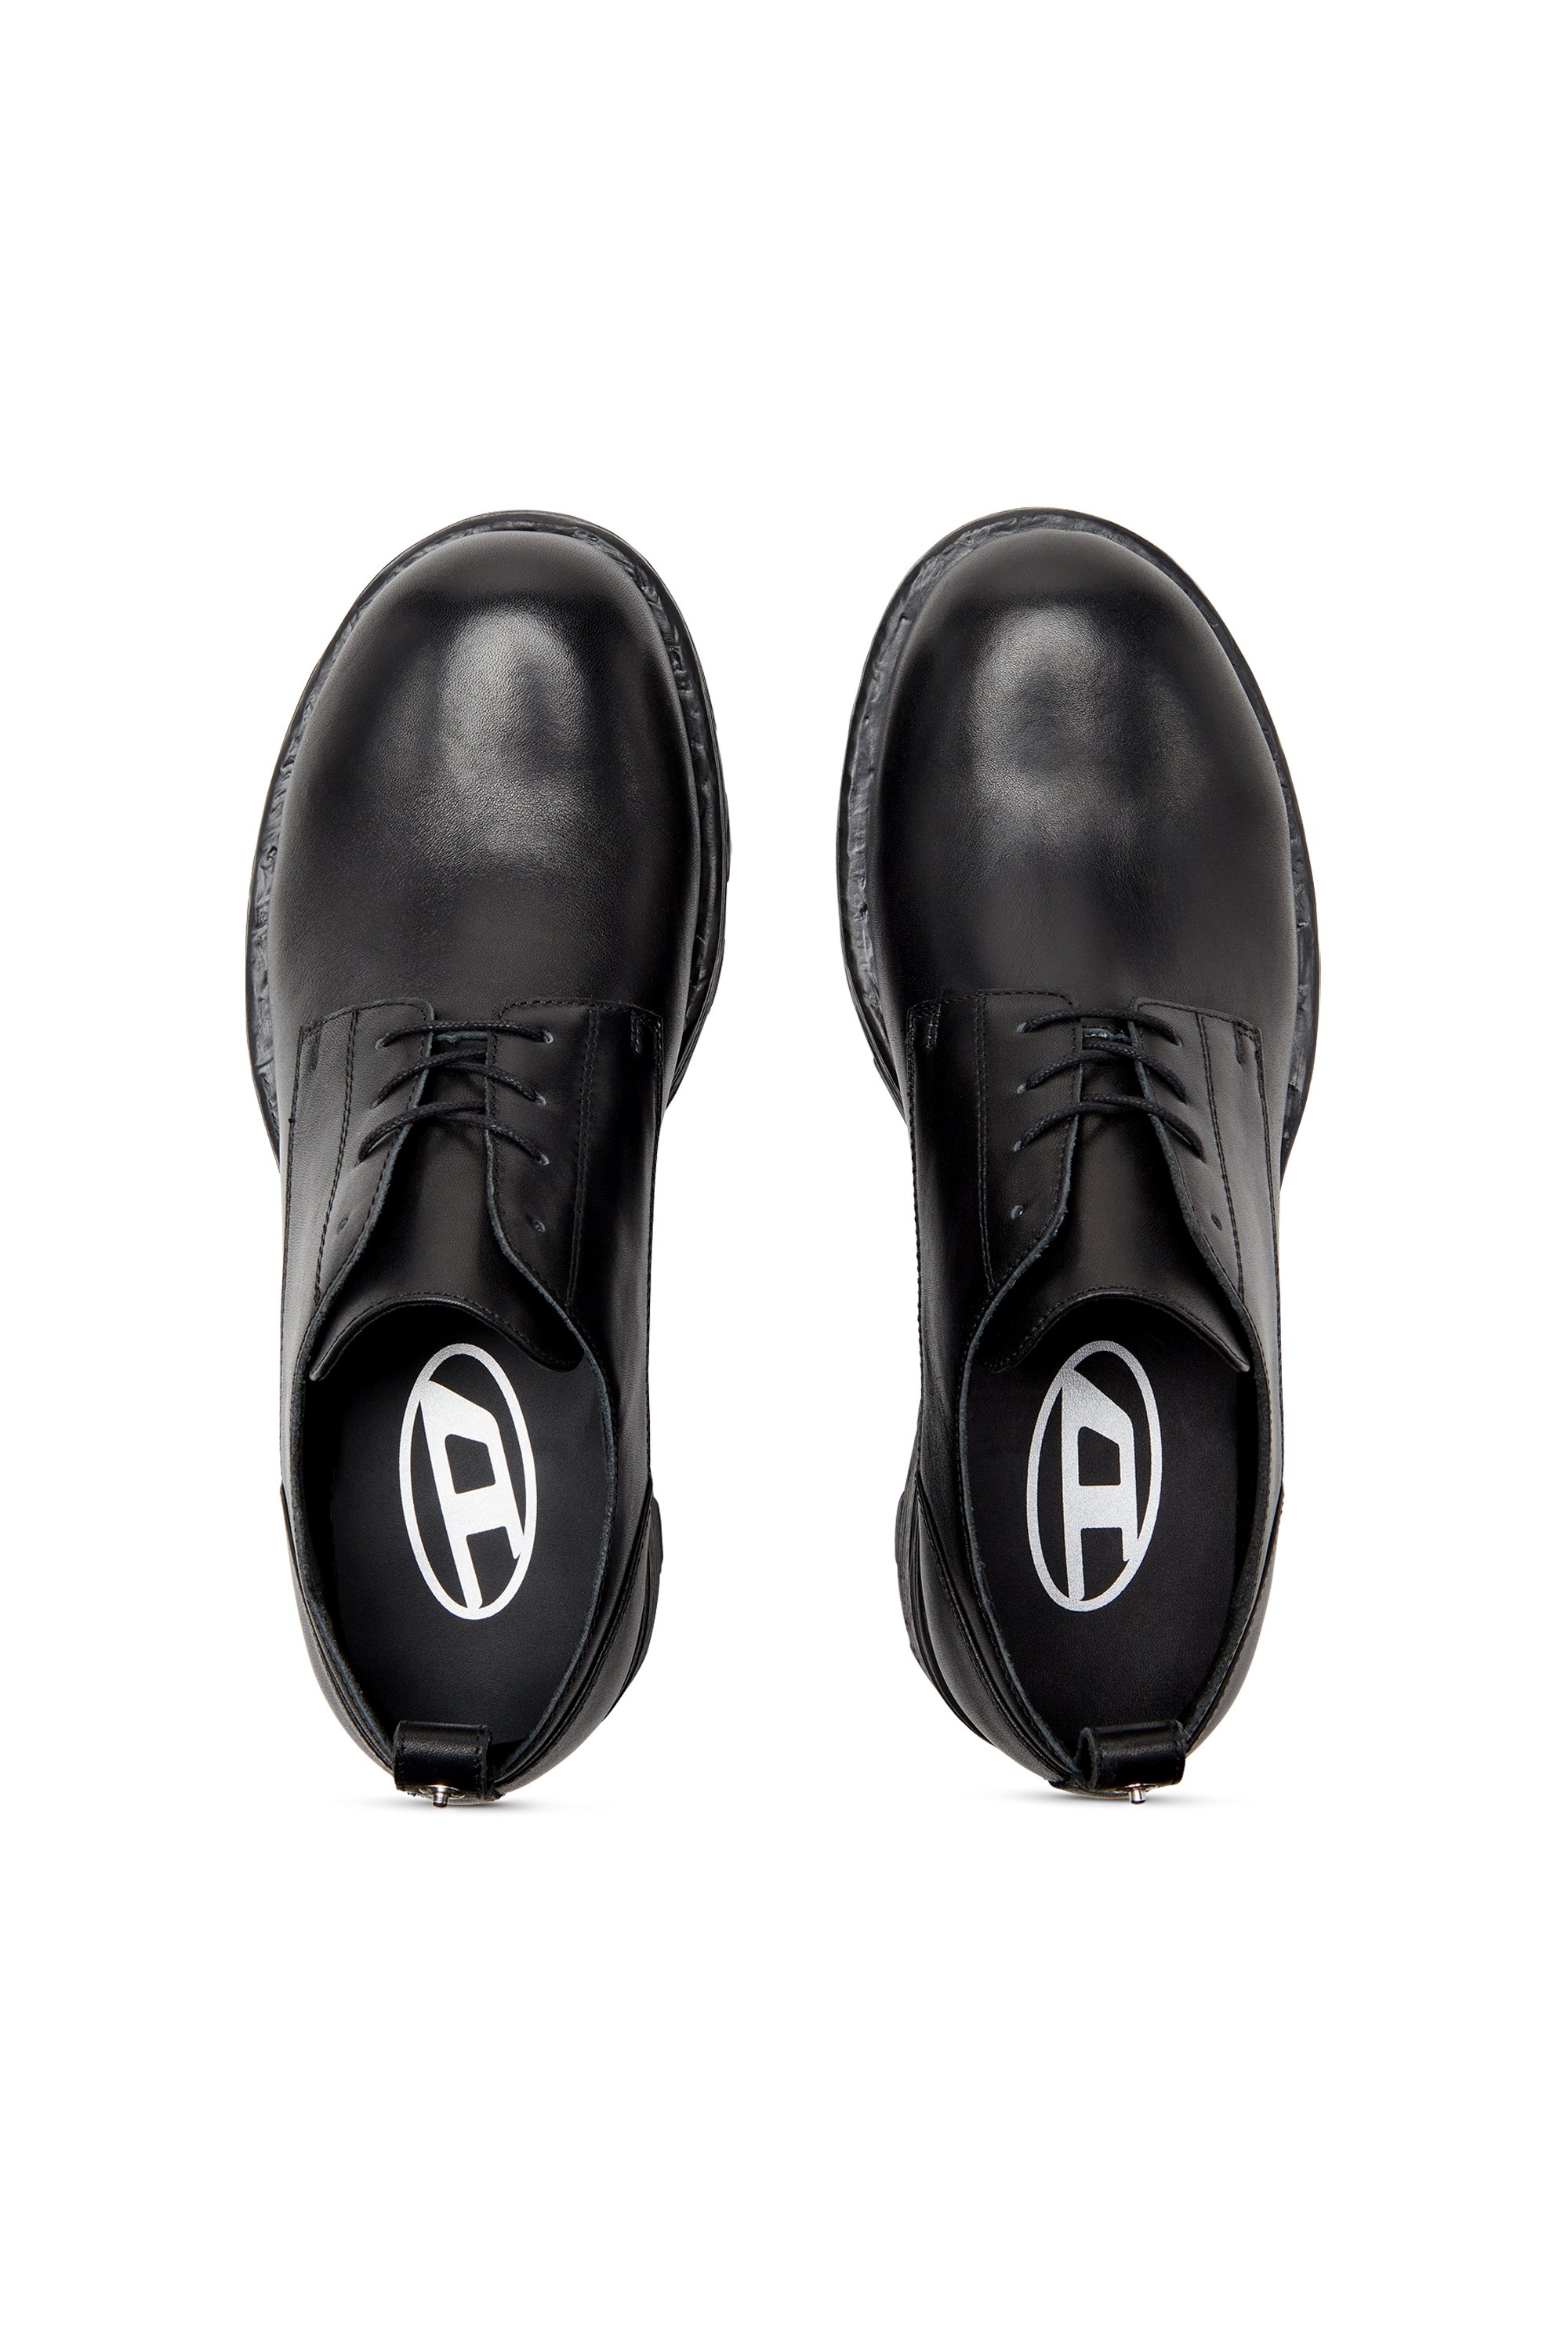 Diesel - D-HAMMER SH, Man D-Hammer-Derby shoes in textured leather in Black - Image 5